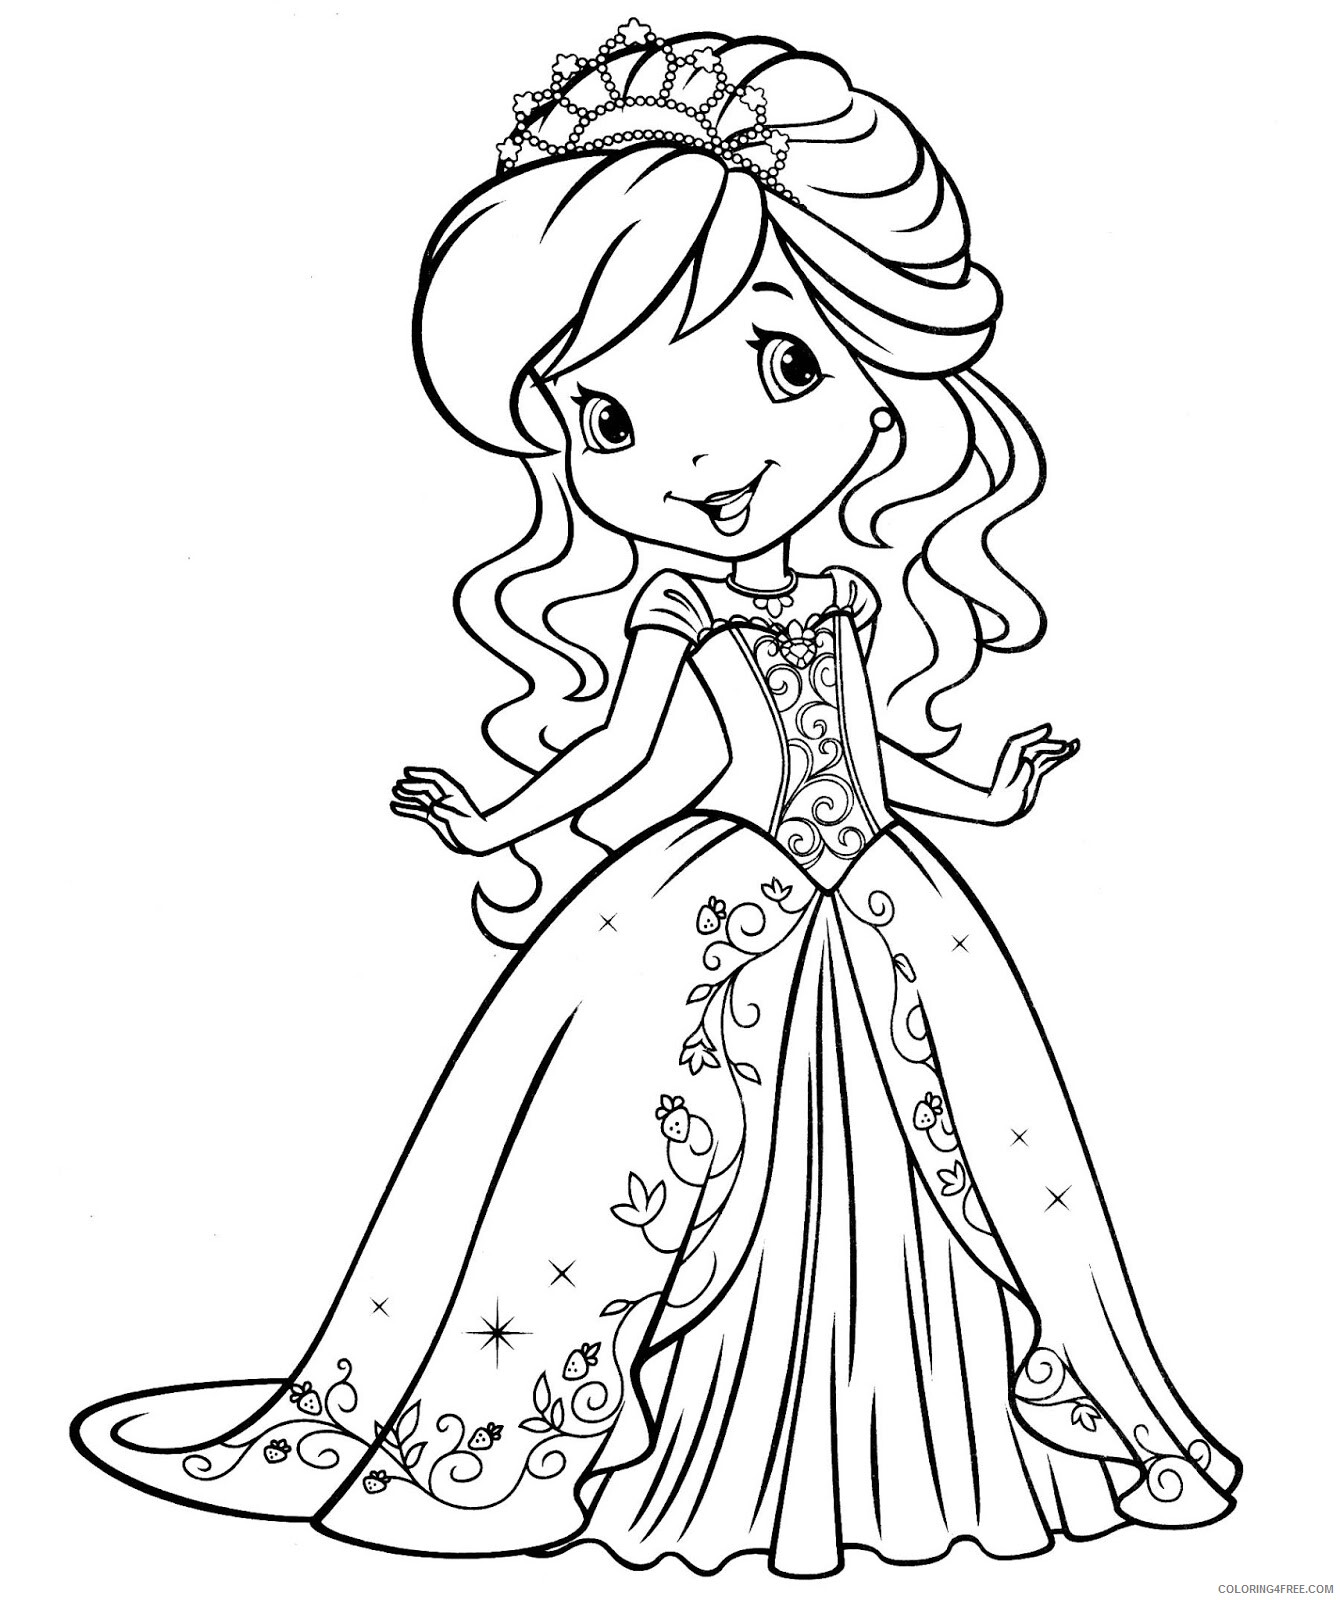 Girl Coloring Pages For Girls Cute For Girls Printable 2021 0542 Coloring4free Coloring4free Com